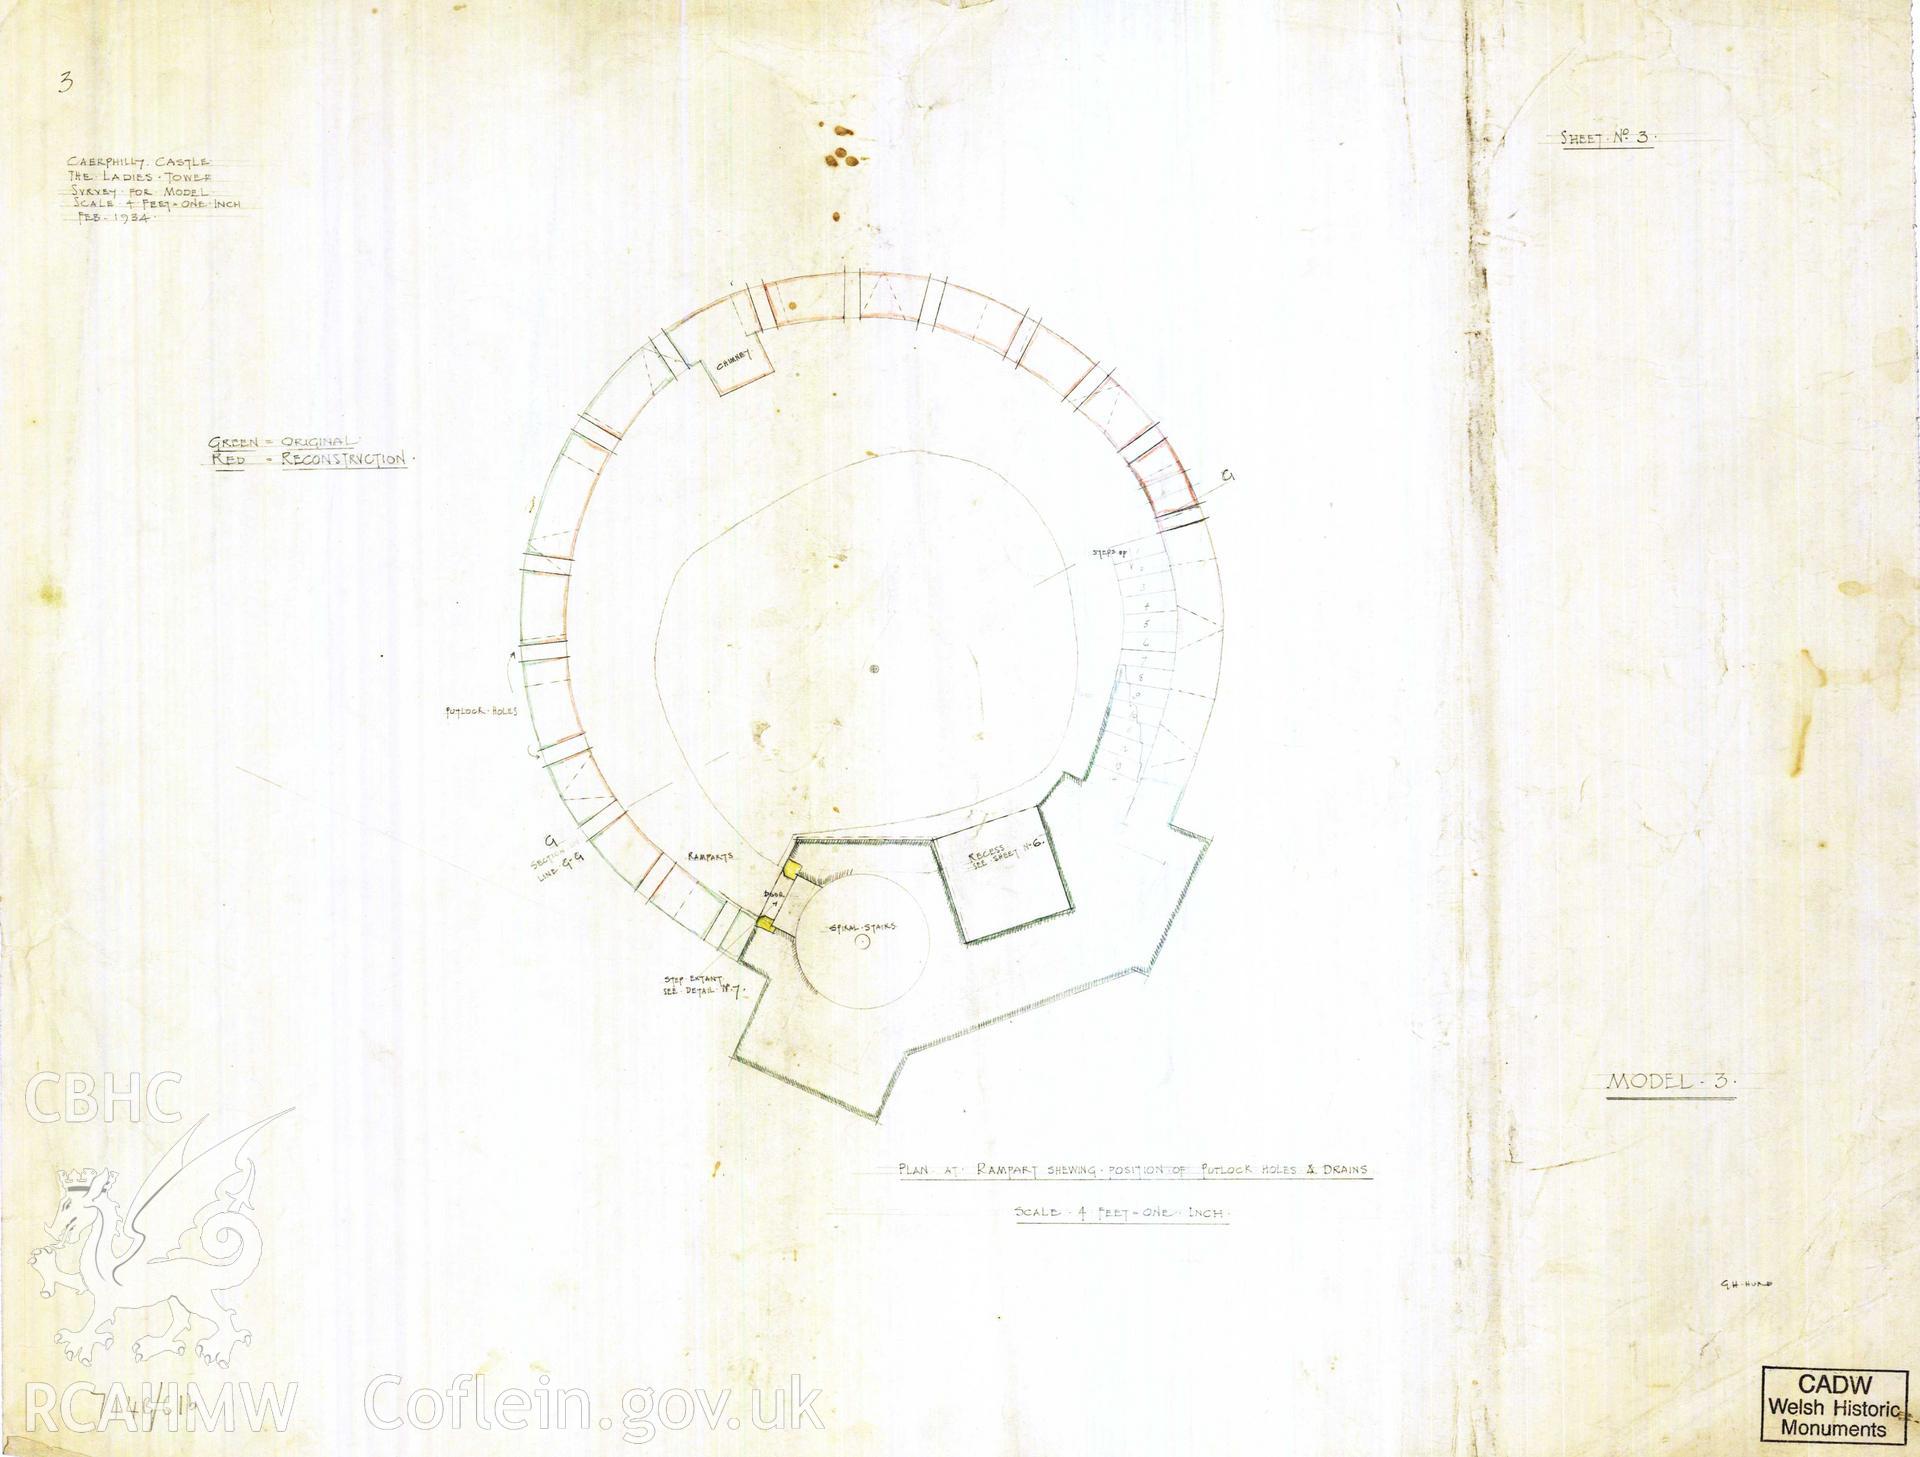 Digital copy of Cadw guardianship monument drawing of Caerphilly Castle. NW tower, 3, putlog plan. Cadw ref. no: 714B/61b. Scale 1:48. Original drawing withdrawn and returned to Cadw at their request.